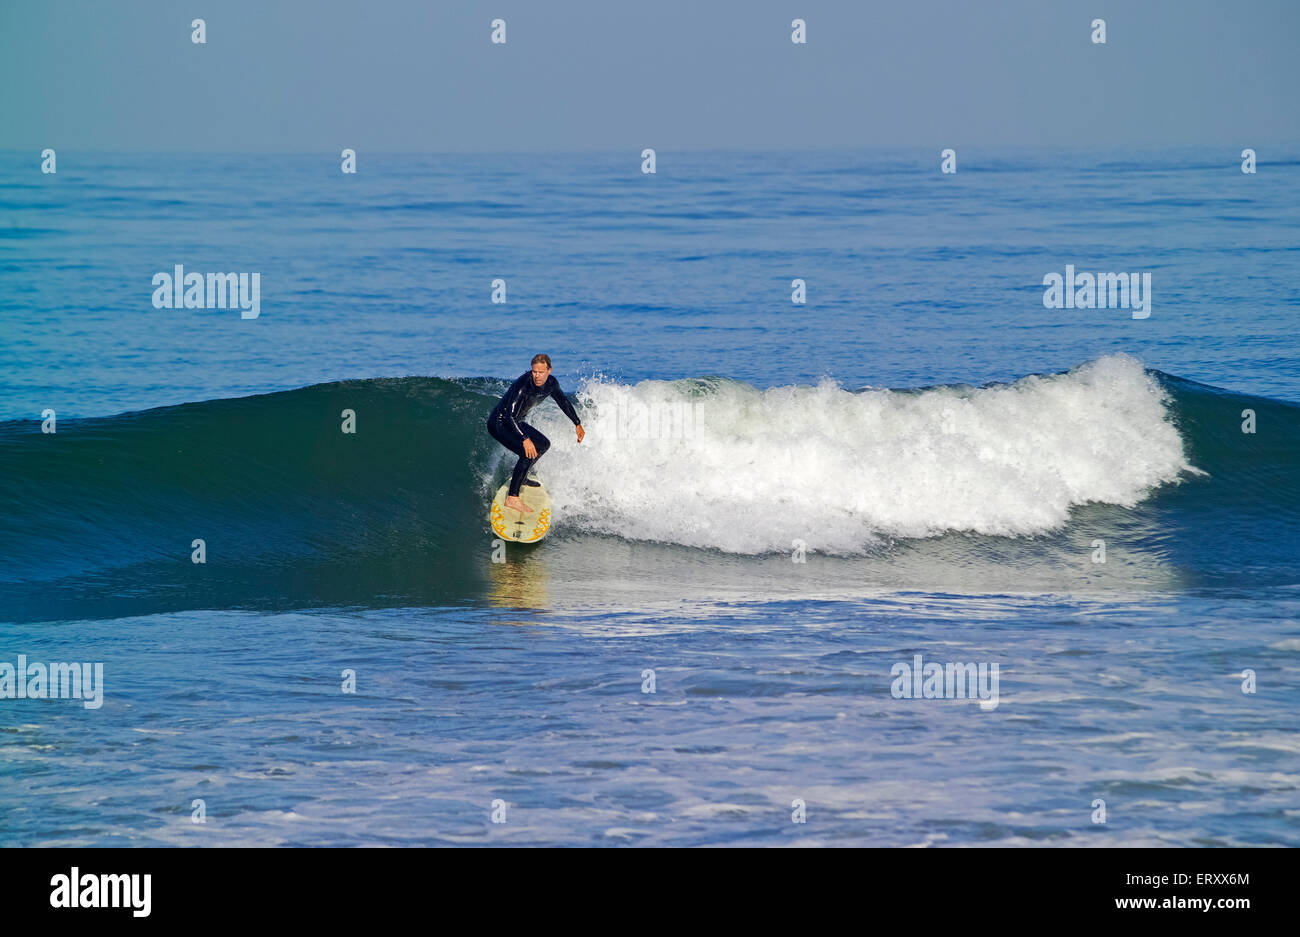 An older male surfer in a black wetsuit catches a Pacific Ocean wave at the famous Trestles surfing spot along San Onofre State Beach at San Clemente on the Southern California coast, USA. A survey in 2009 found surfers at Trestles had a median age of 37 years and surfed there about 100 times during the year. Stock Photo